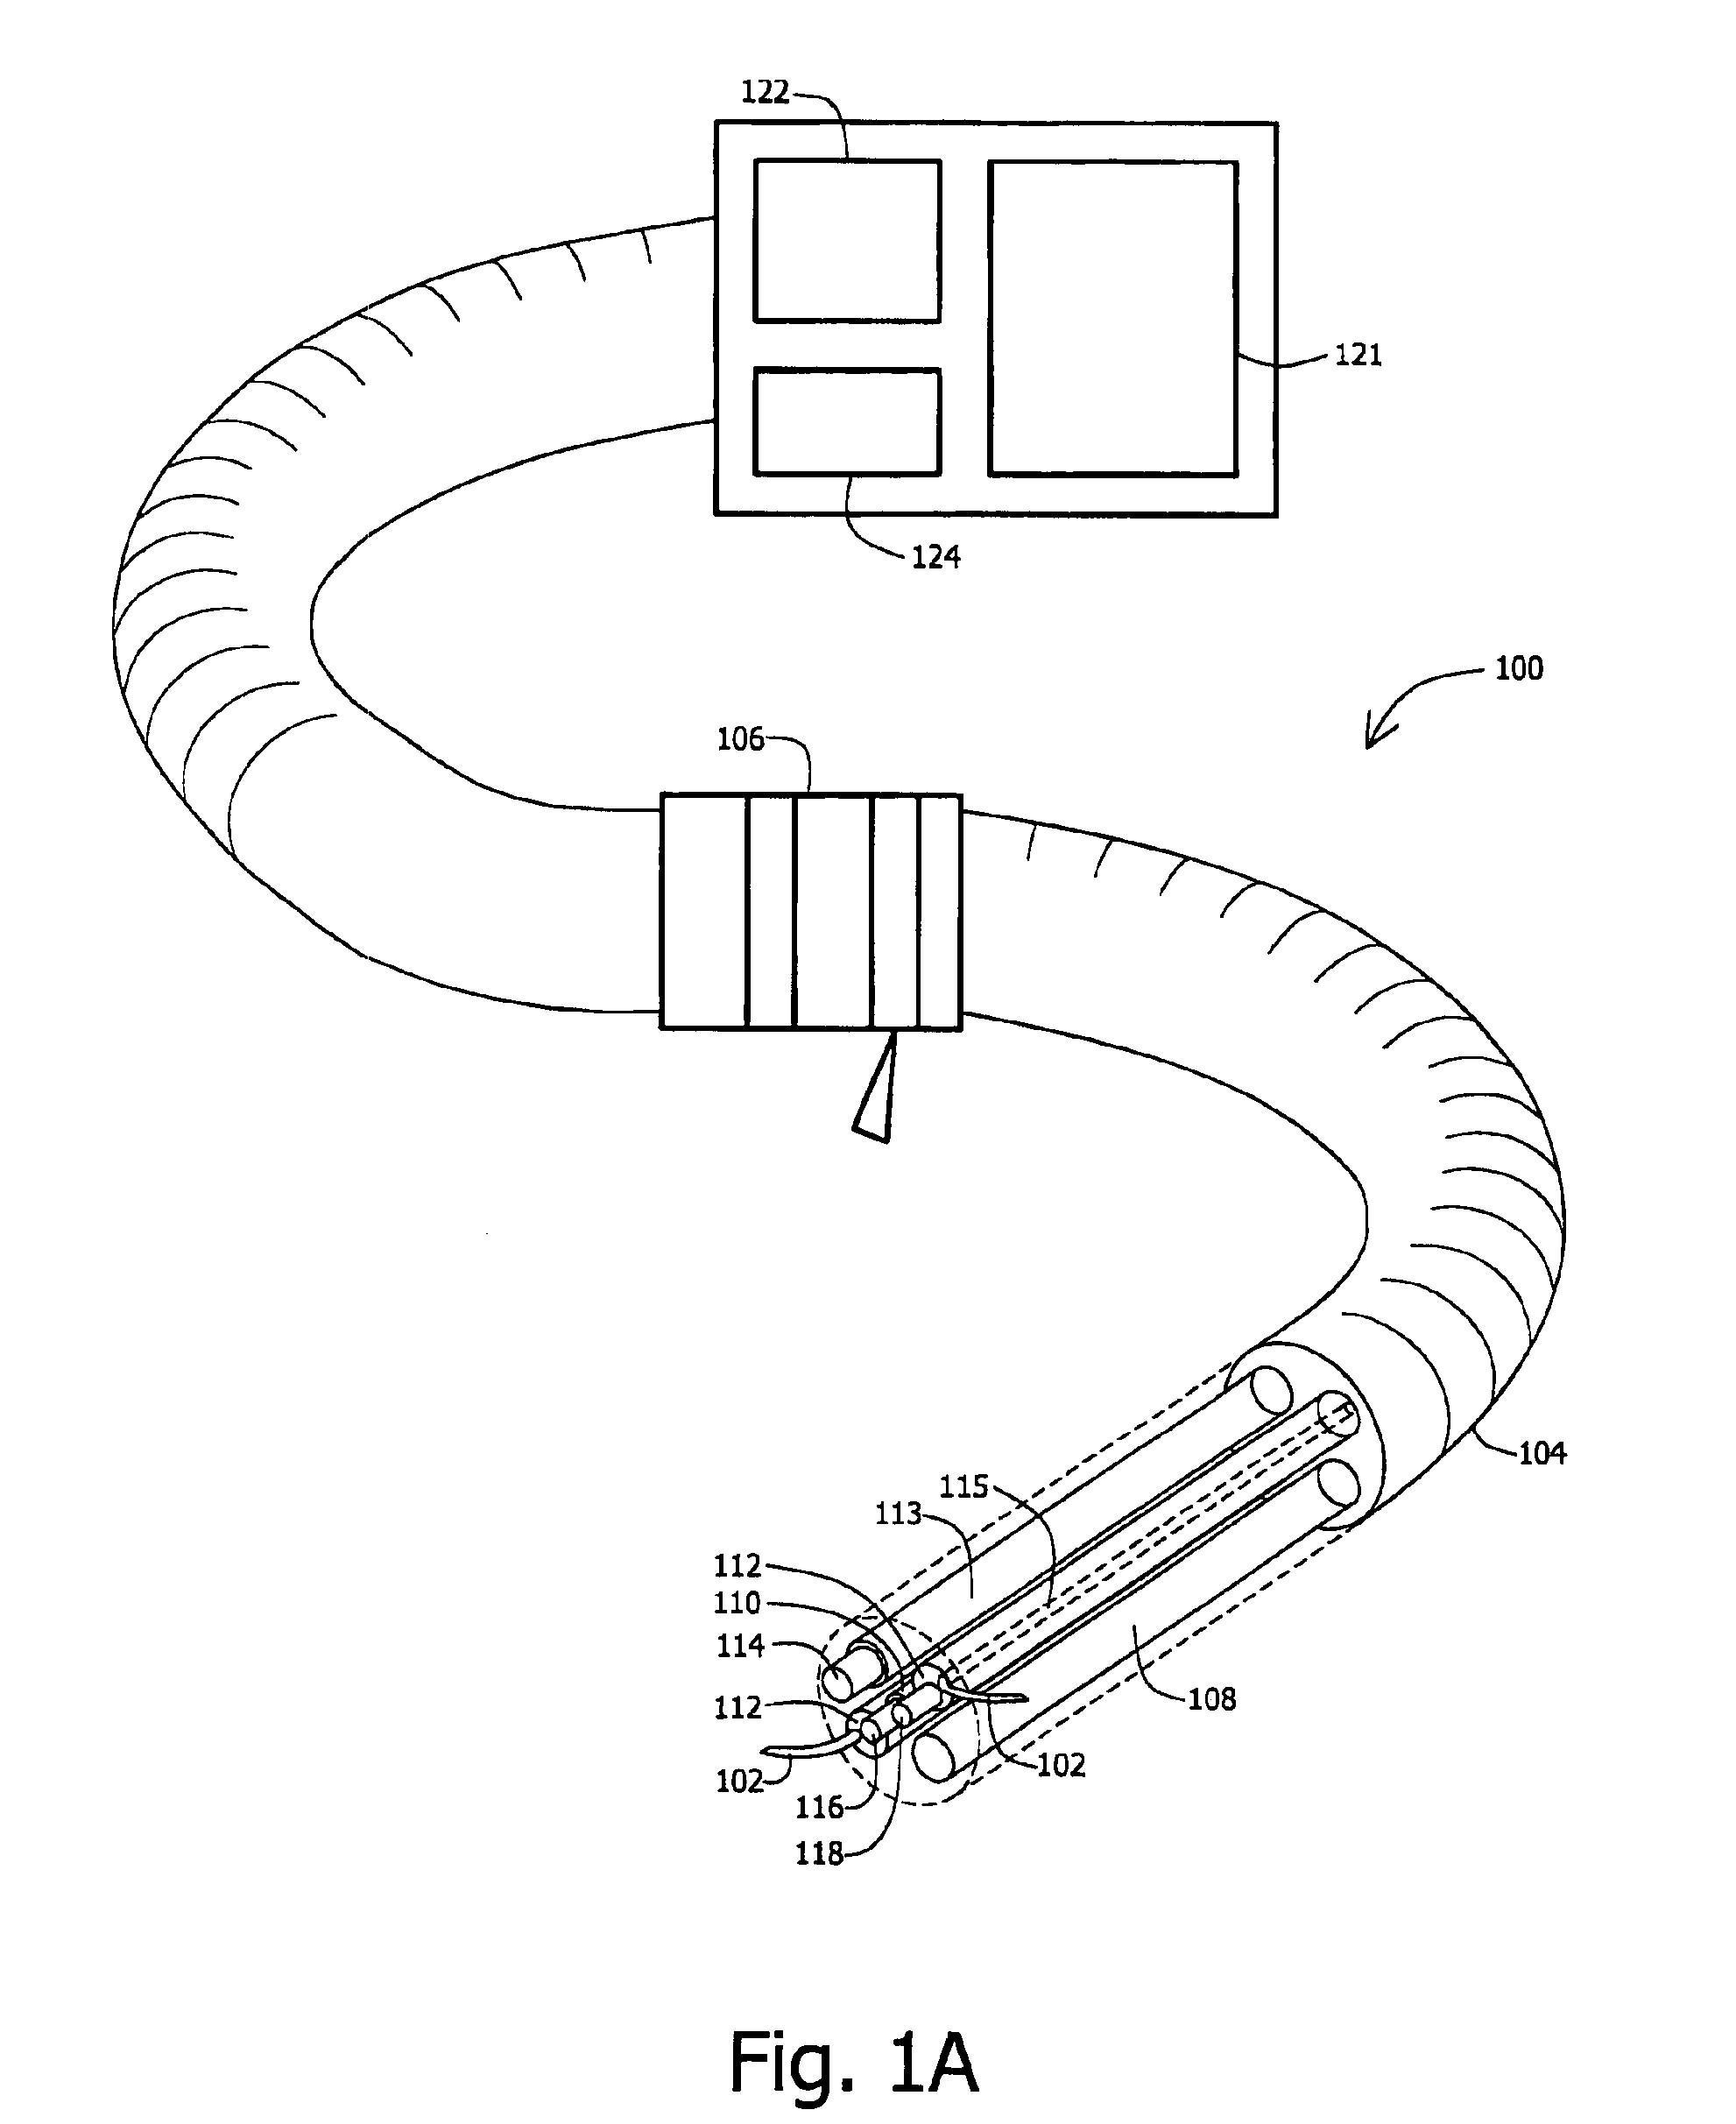 In-vivo extendable element device and system, and method of use